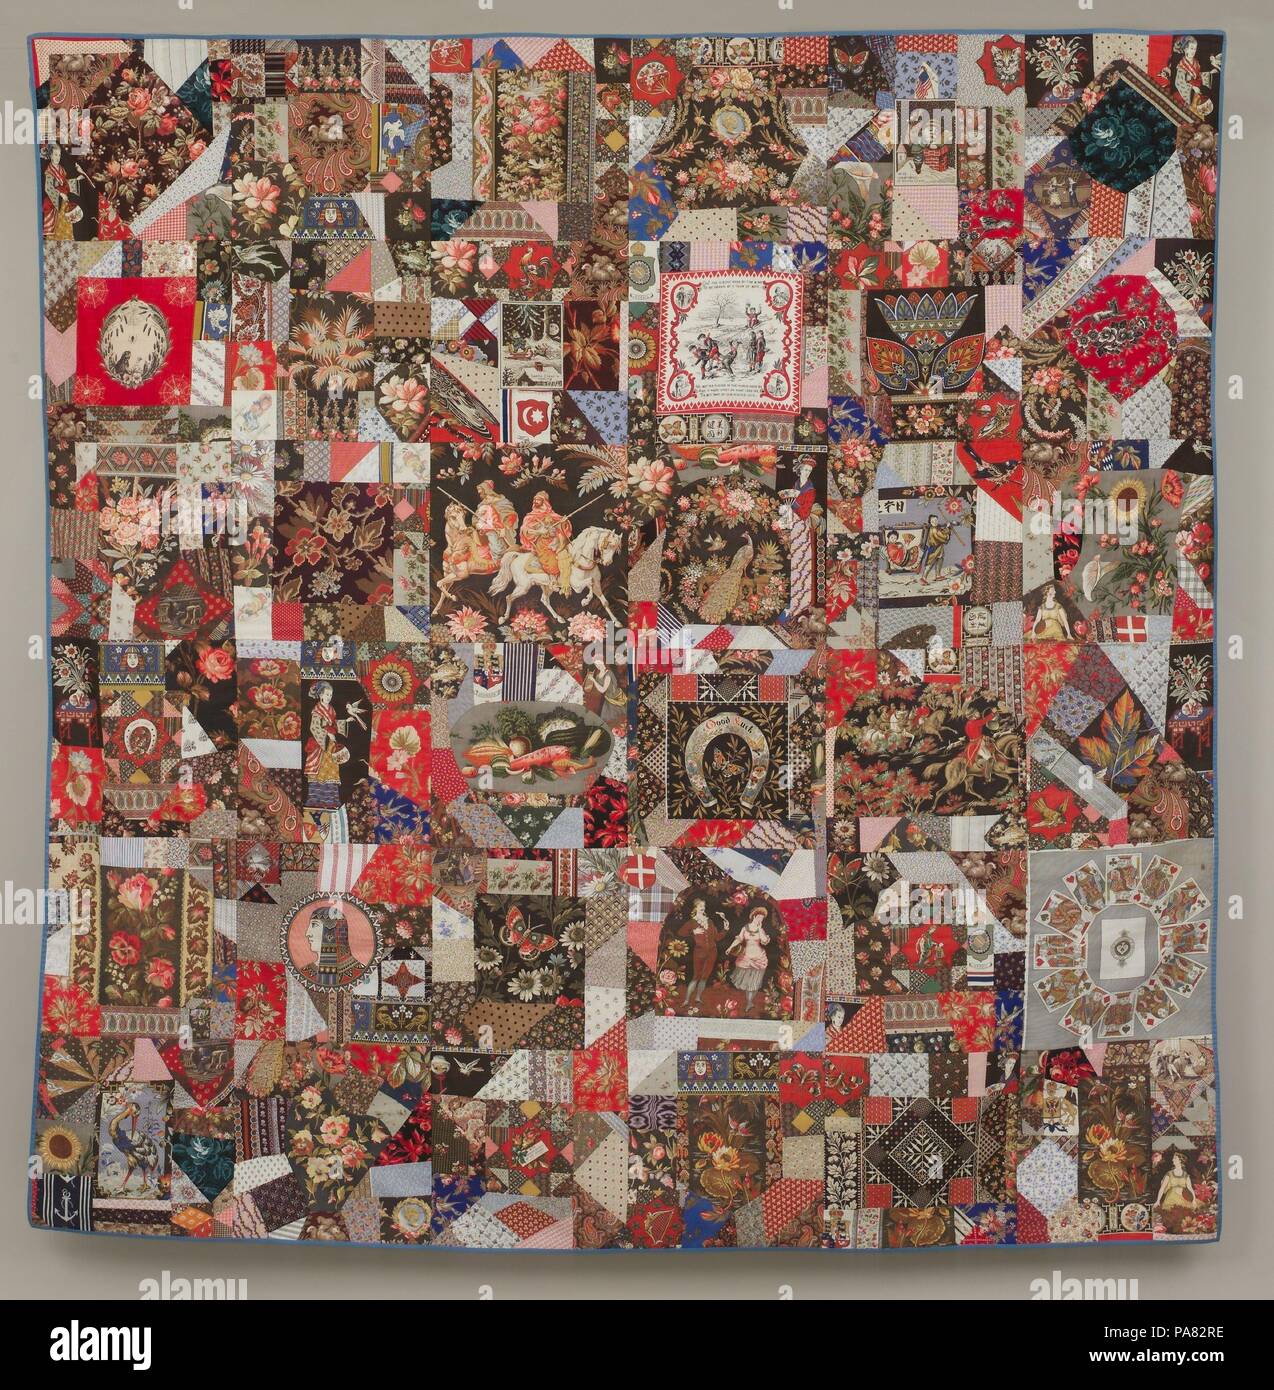 Crazy Quilt. Culture: American. Dimensions: 80 1/4 x 80 in. (203.8 x 203.2 cm). Date: ca. 1880-85.  Crazy quilts, a fad in the last decades of the nineteenth century, were most commonly pieced from irregularly shaped bits of velvet and silk. This exuberant quilt is far more unusual, since its unknown maker chose to craft it from brightly patterned cottons. The cottons create an album of fashionable, though inexpensive, fabrics of the 1880s, including Egyptian Revival and Japanesque designs, children's handkerchiefs, and pieces of 'cheater' cloth--fabric that was printed to imitate patchwork. O Stock Photo